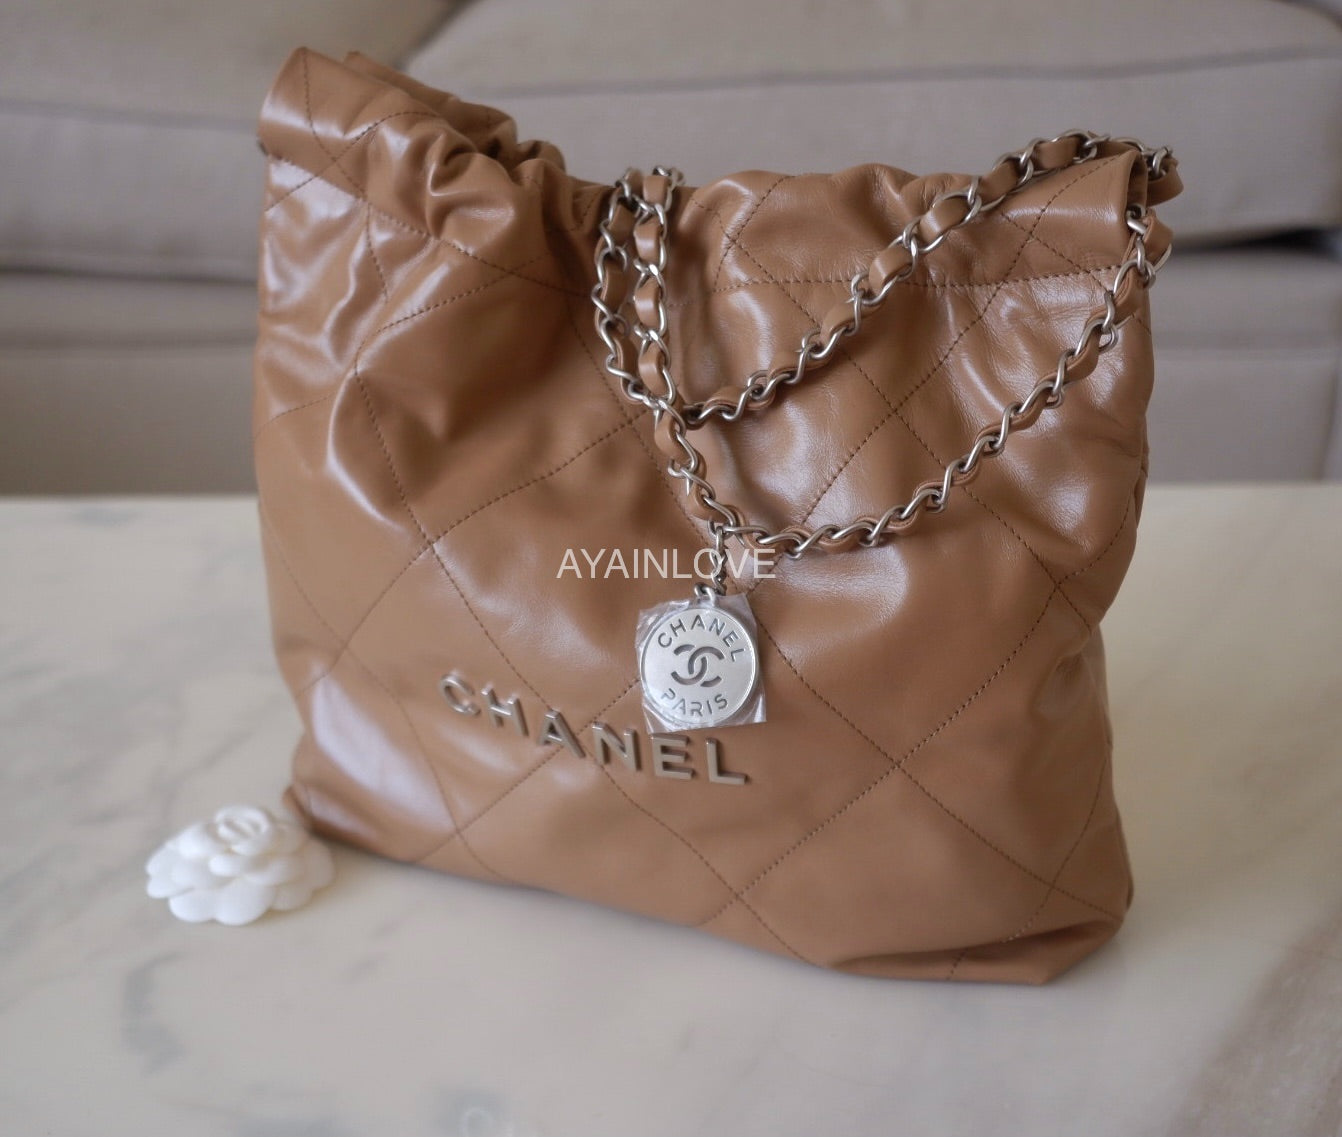 Chanel Deauville Tote Small, Beige with Silver Hardware, Preowned